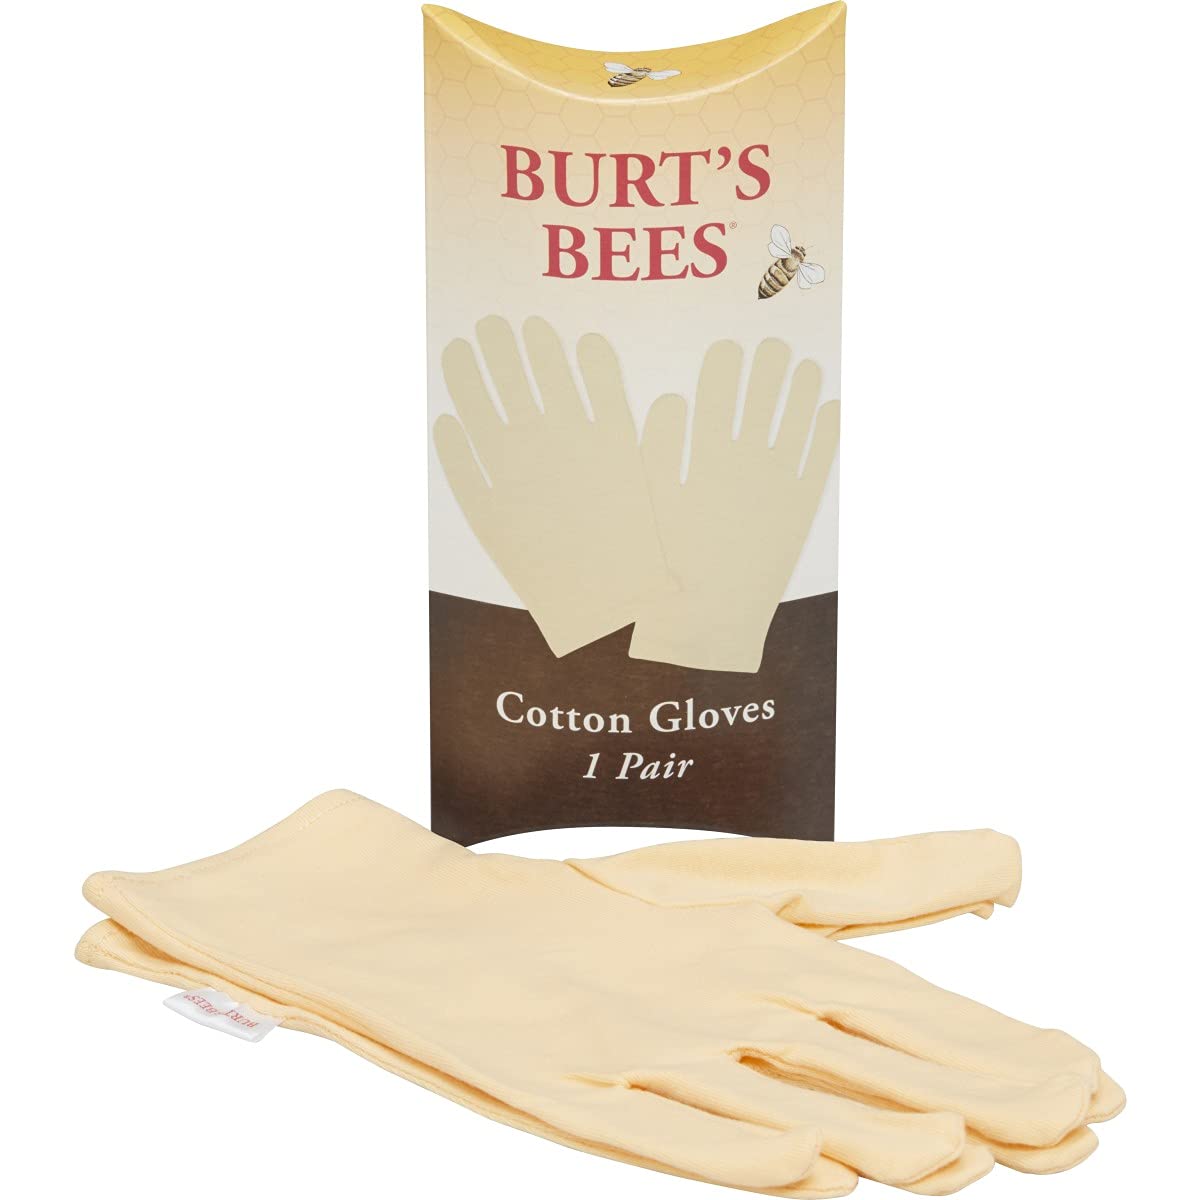 Burt's Bees Back to School Gifts, 3 Dorm Products for College Students, Hand Repair Set - Almond and Milk Cream, Lemon Butter Cuticle Cream & Shea Butter Cream, with gloves